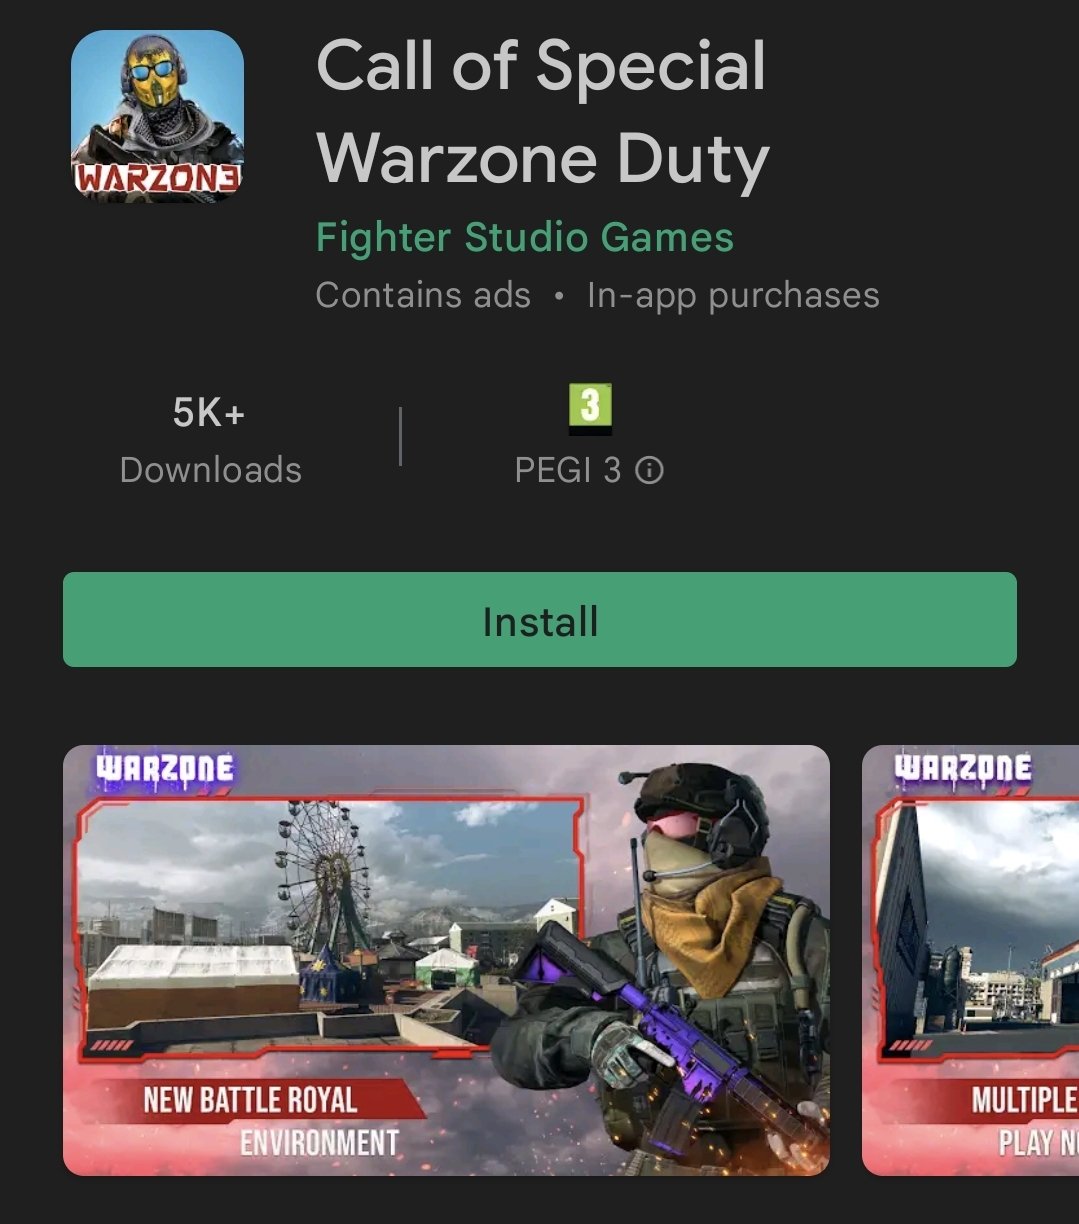 PlayCODNews on X: Will you quit CODM for Warzone Mobile? 🤔   / X